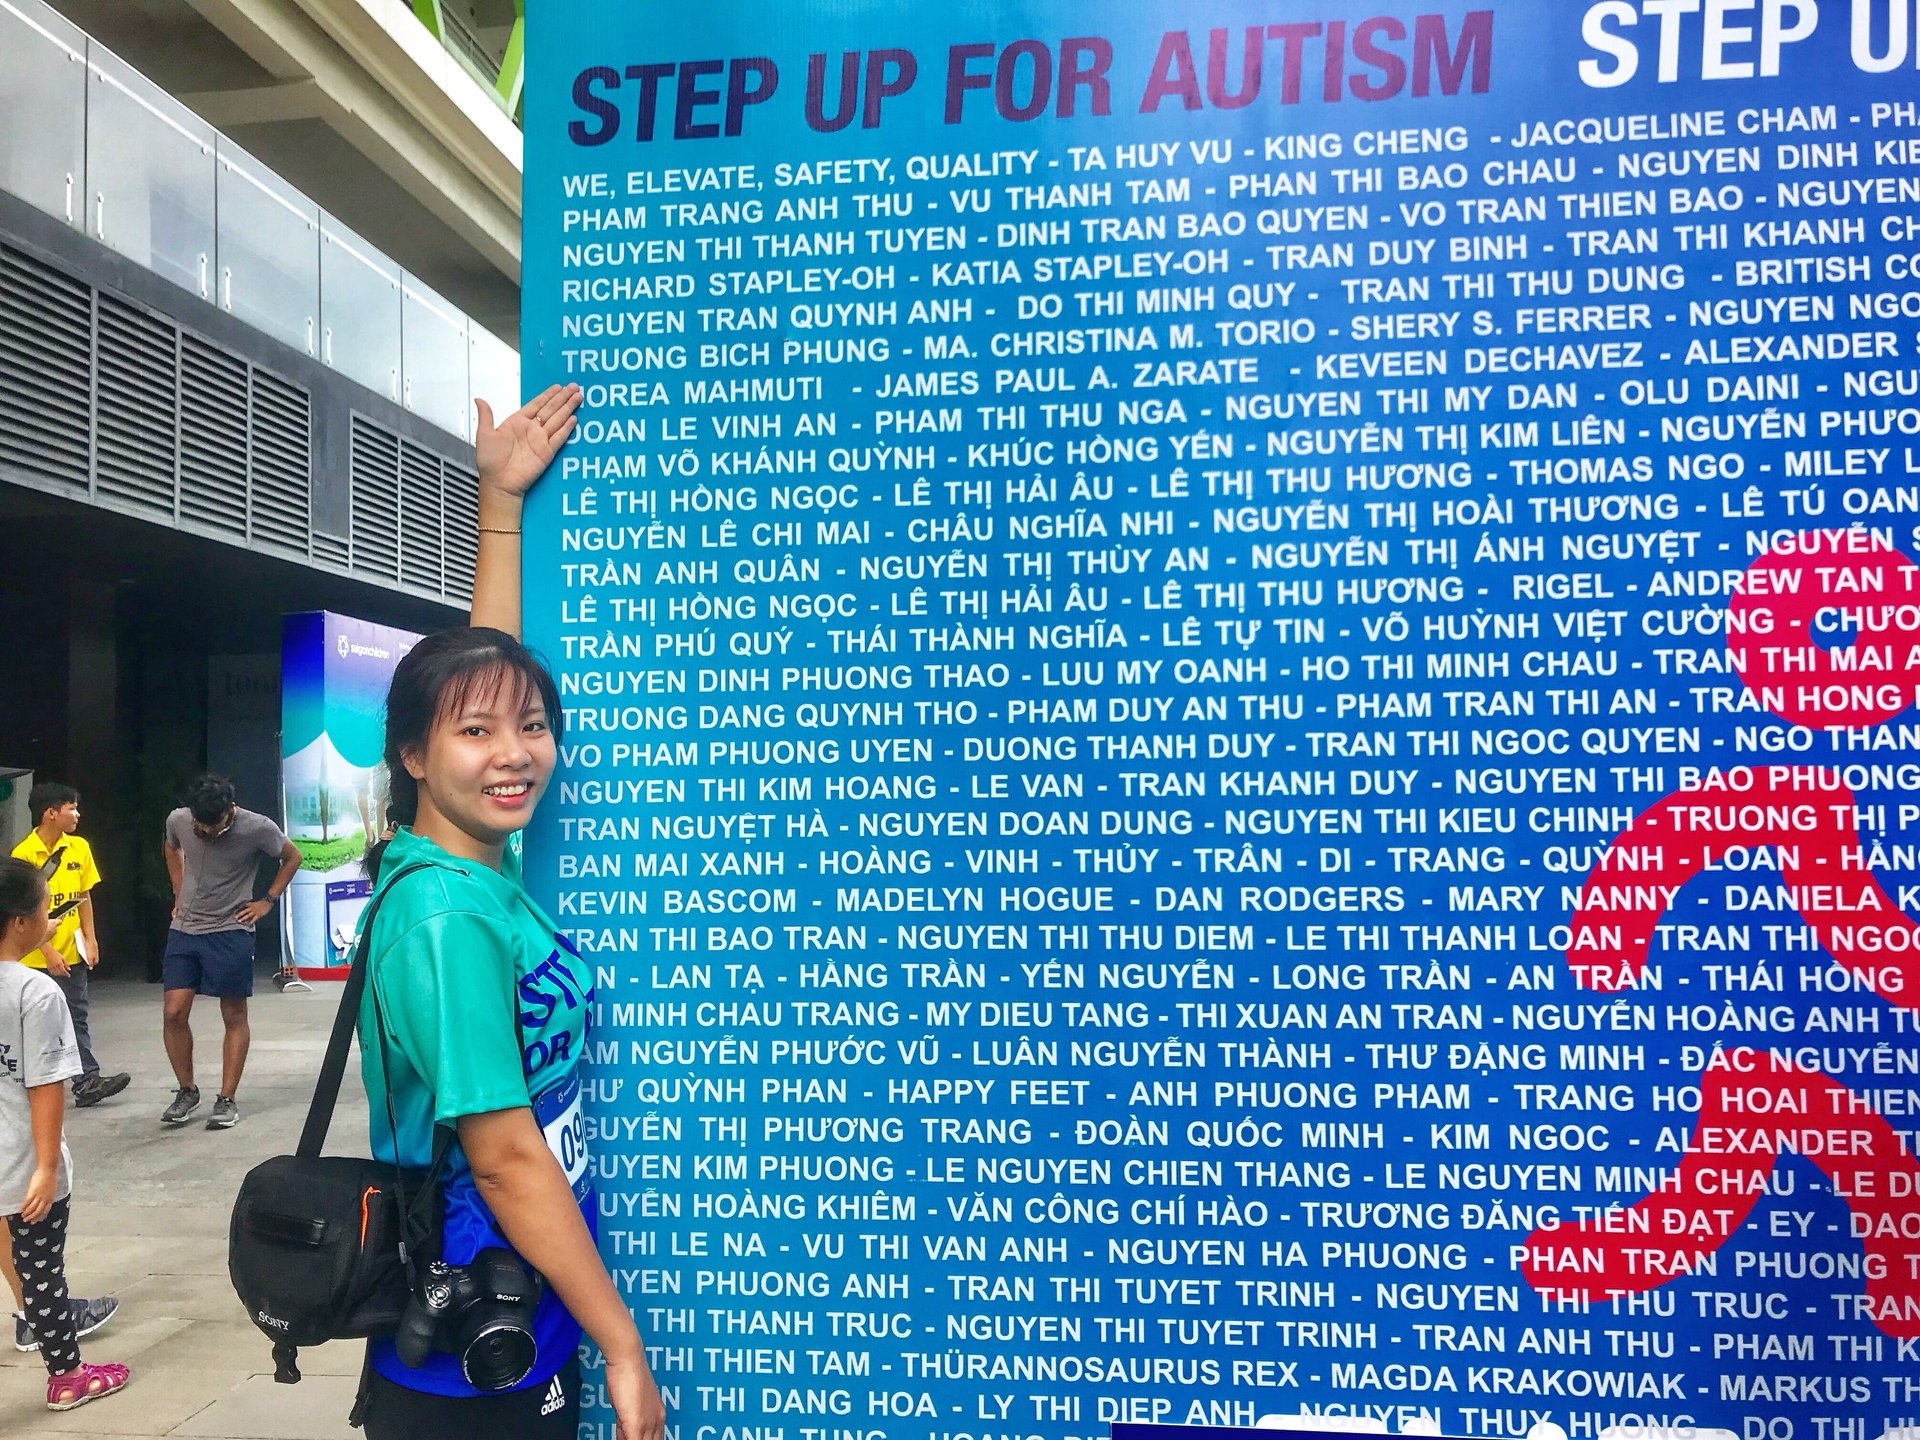 STEPS UP FOR CHILDREN WITH AUTISM